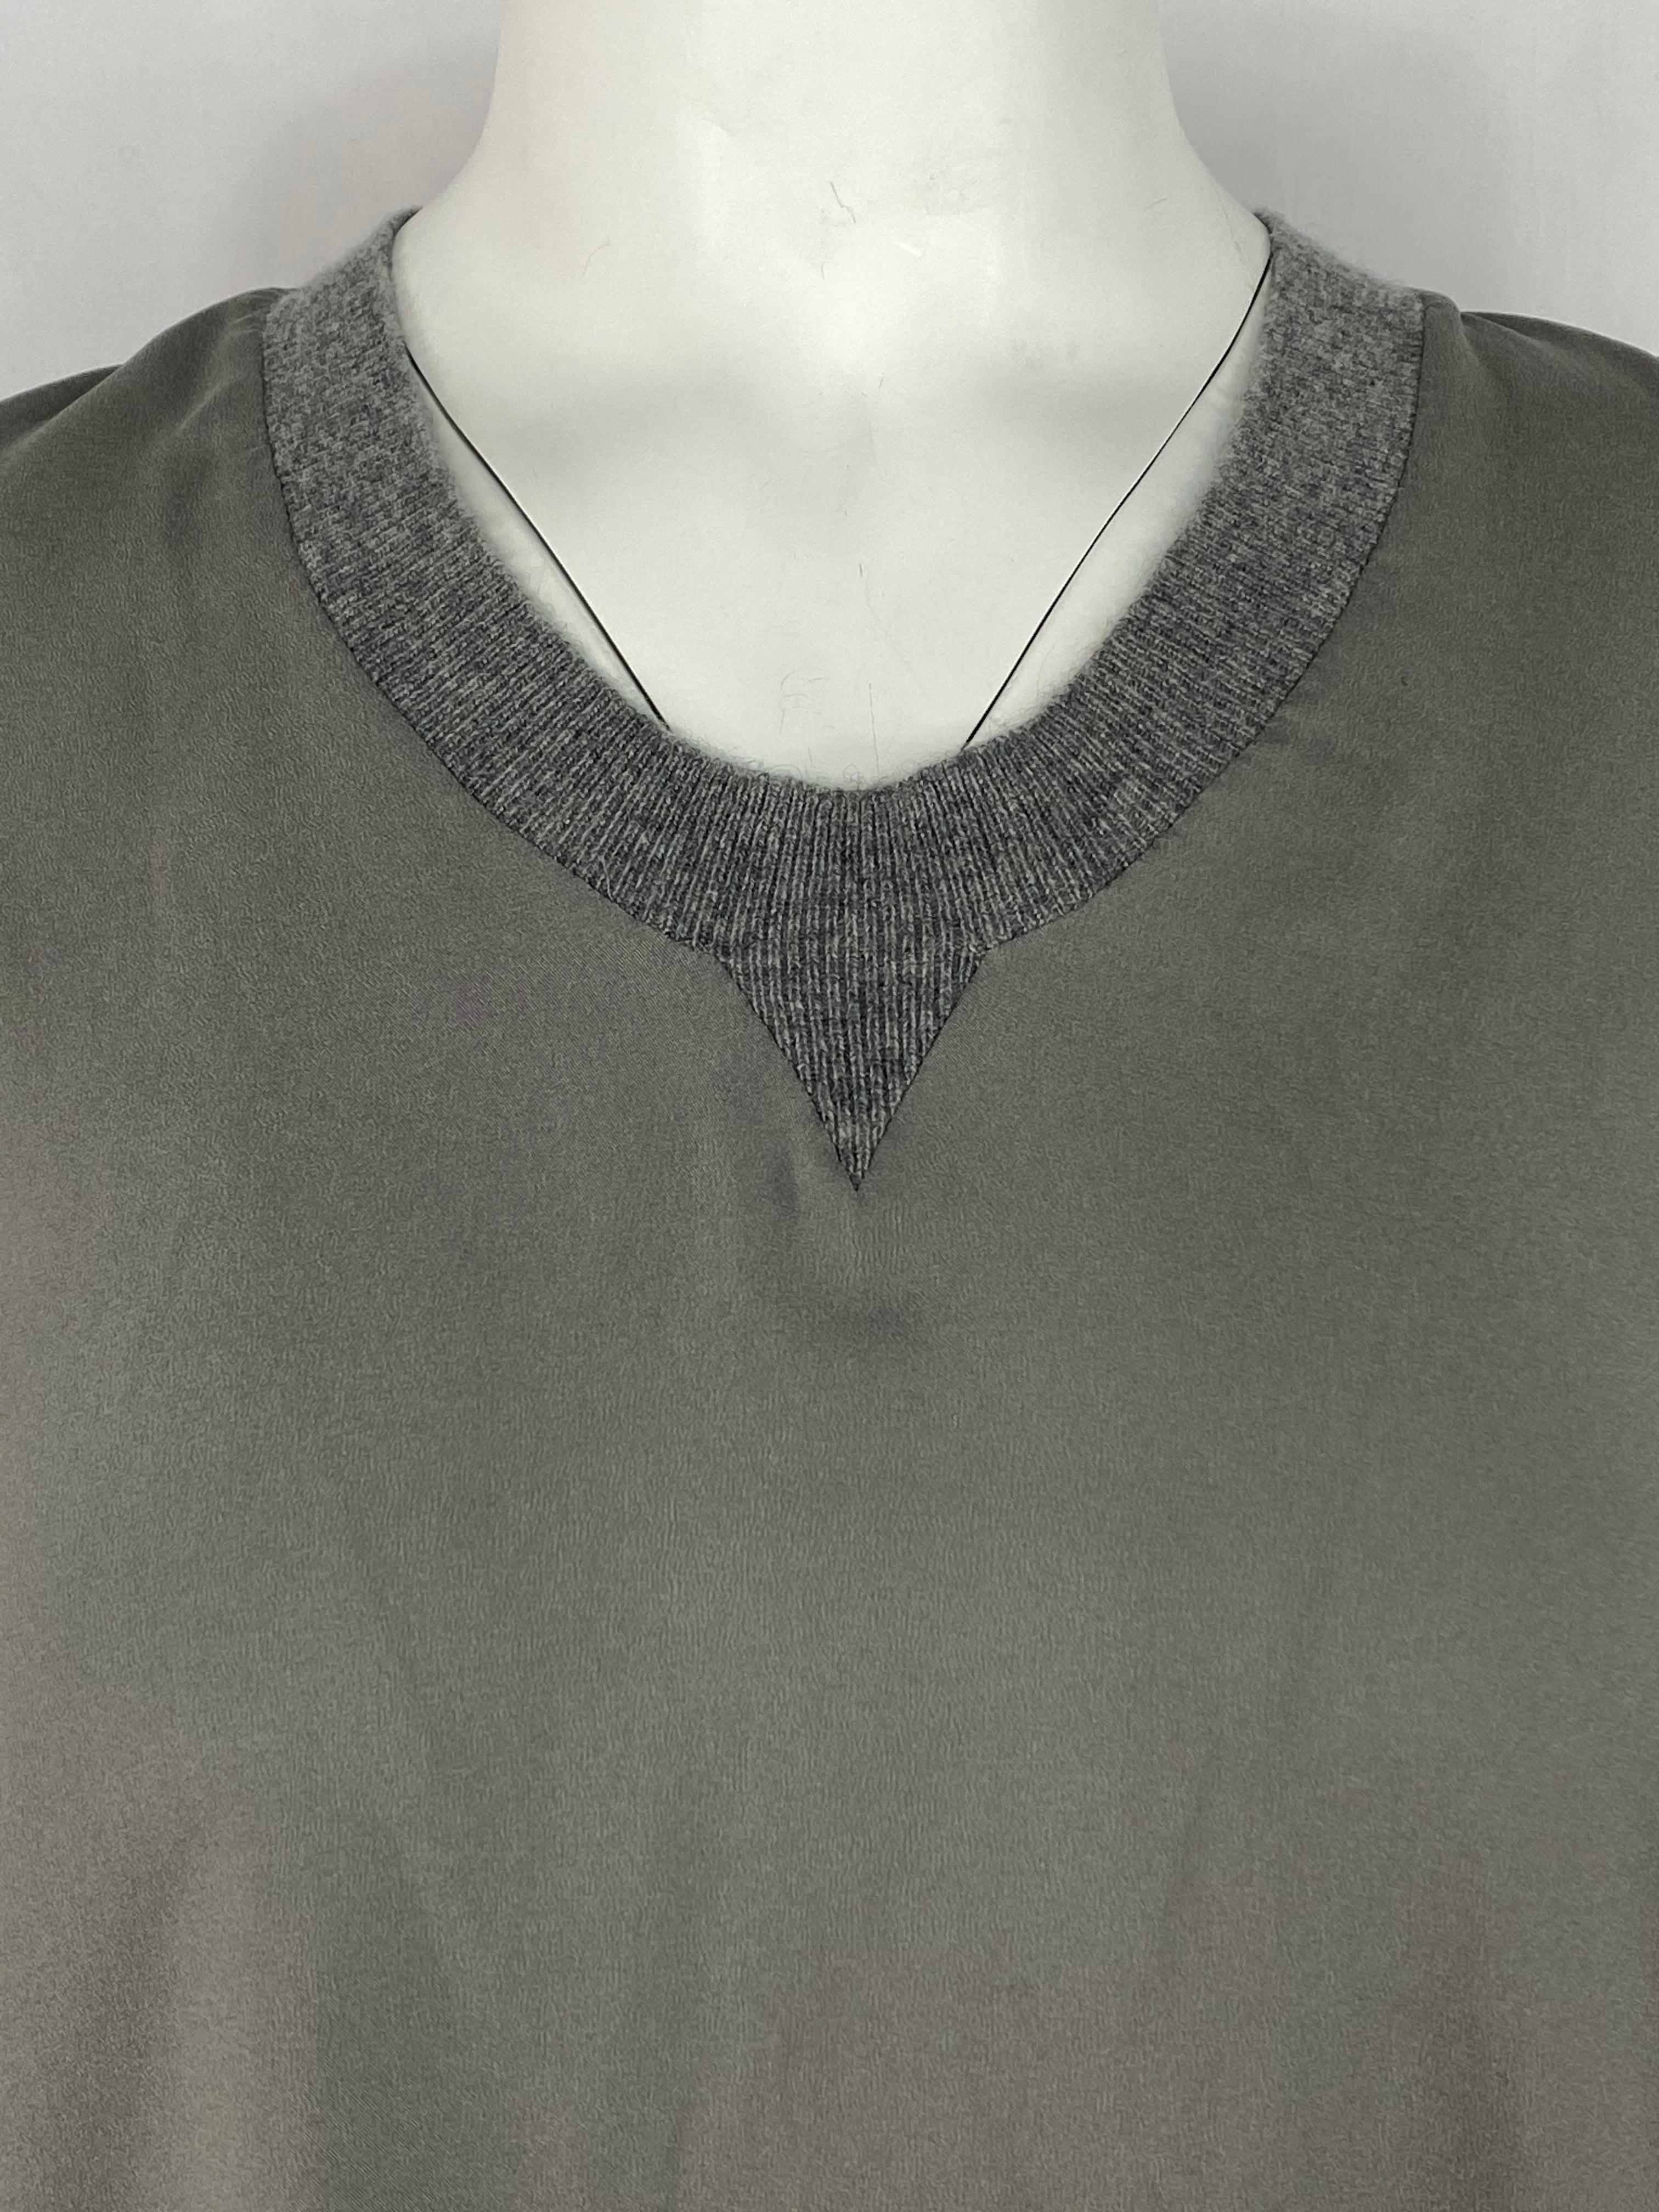 Product details:

Featuring grey, green, olive, silk, crew neck with grey knit detail, sleeveless, asymmetrical style. The shorter side measures 29